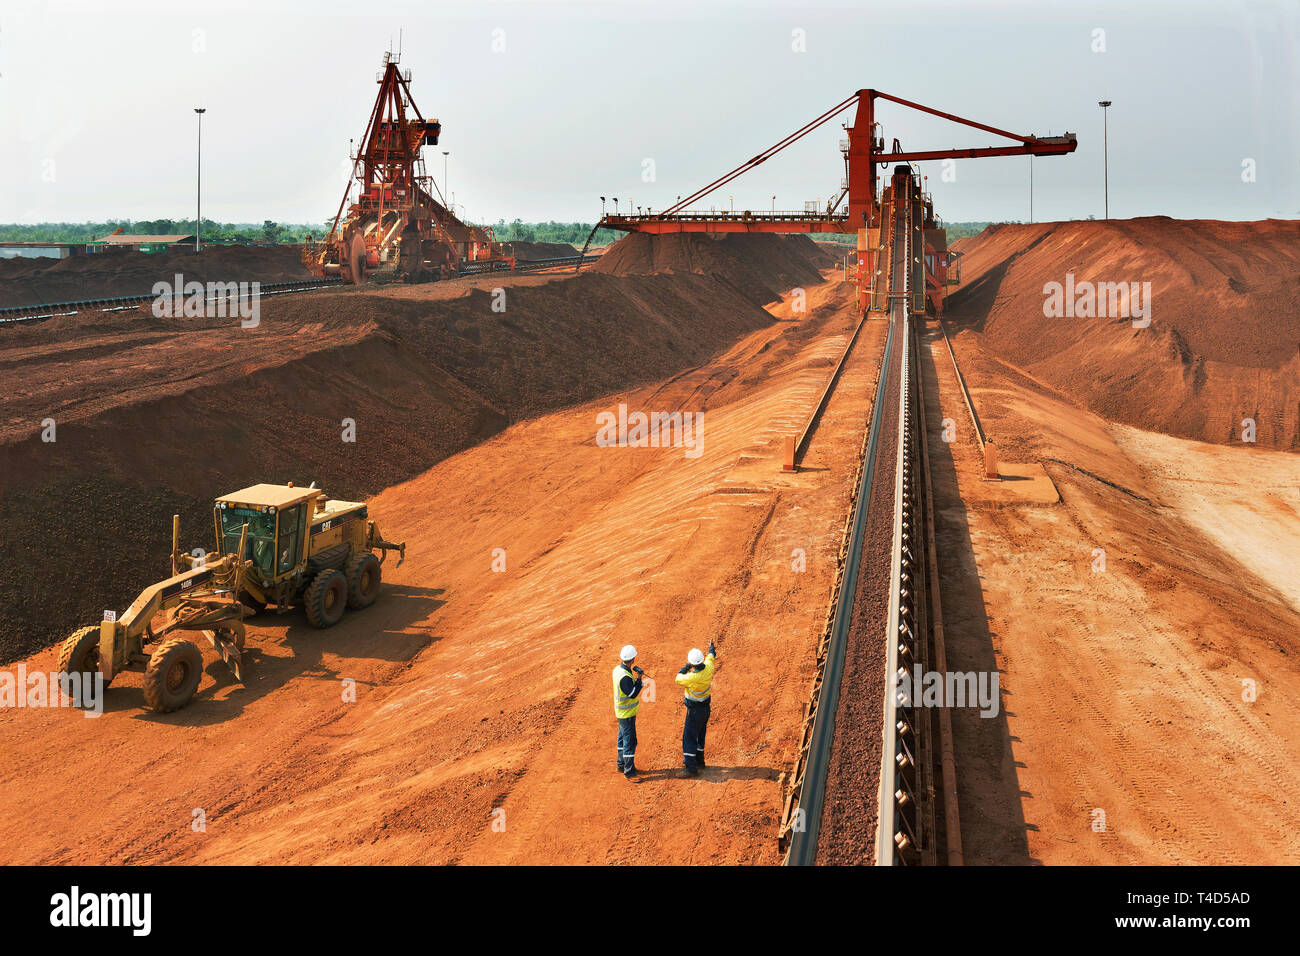 Port operations for managing & transporting iron ore. Along conveyor belt to newly built stacker with stacker reclaimer to left plus grader vehicle. Stock Photo